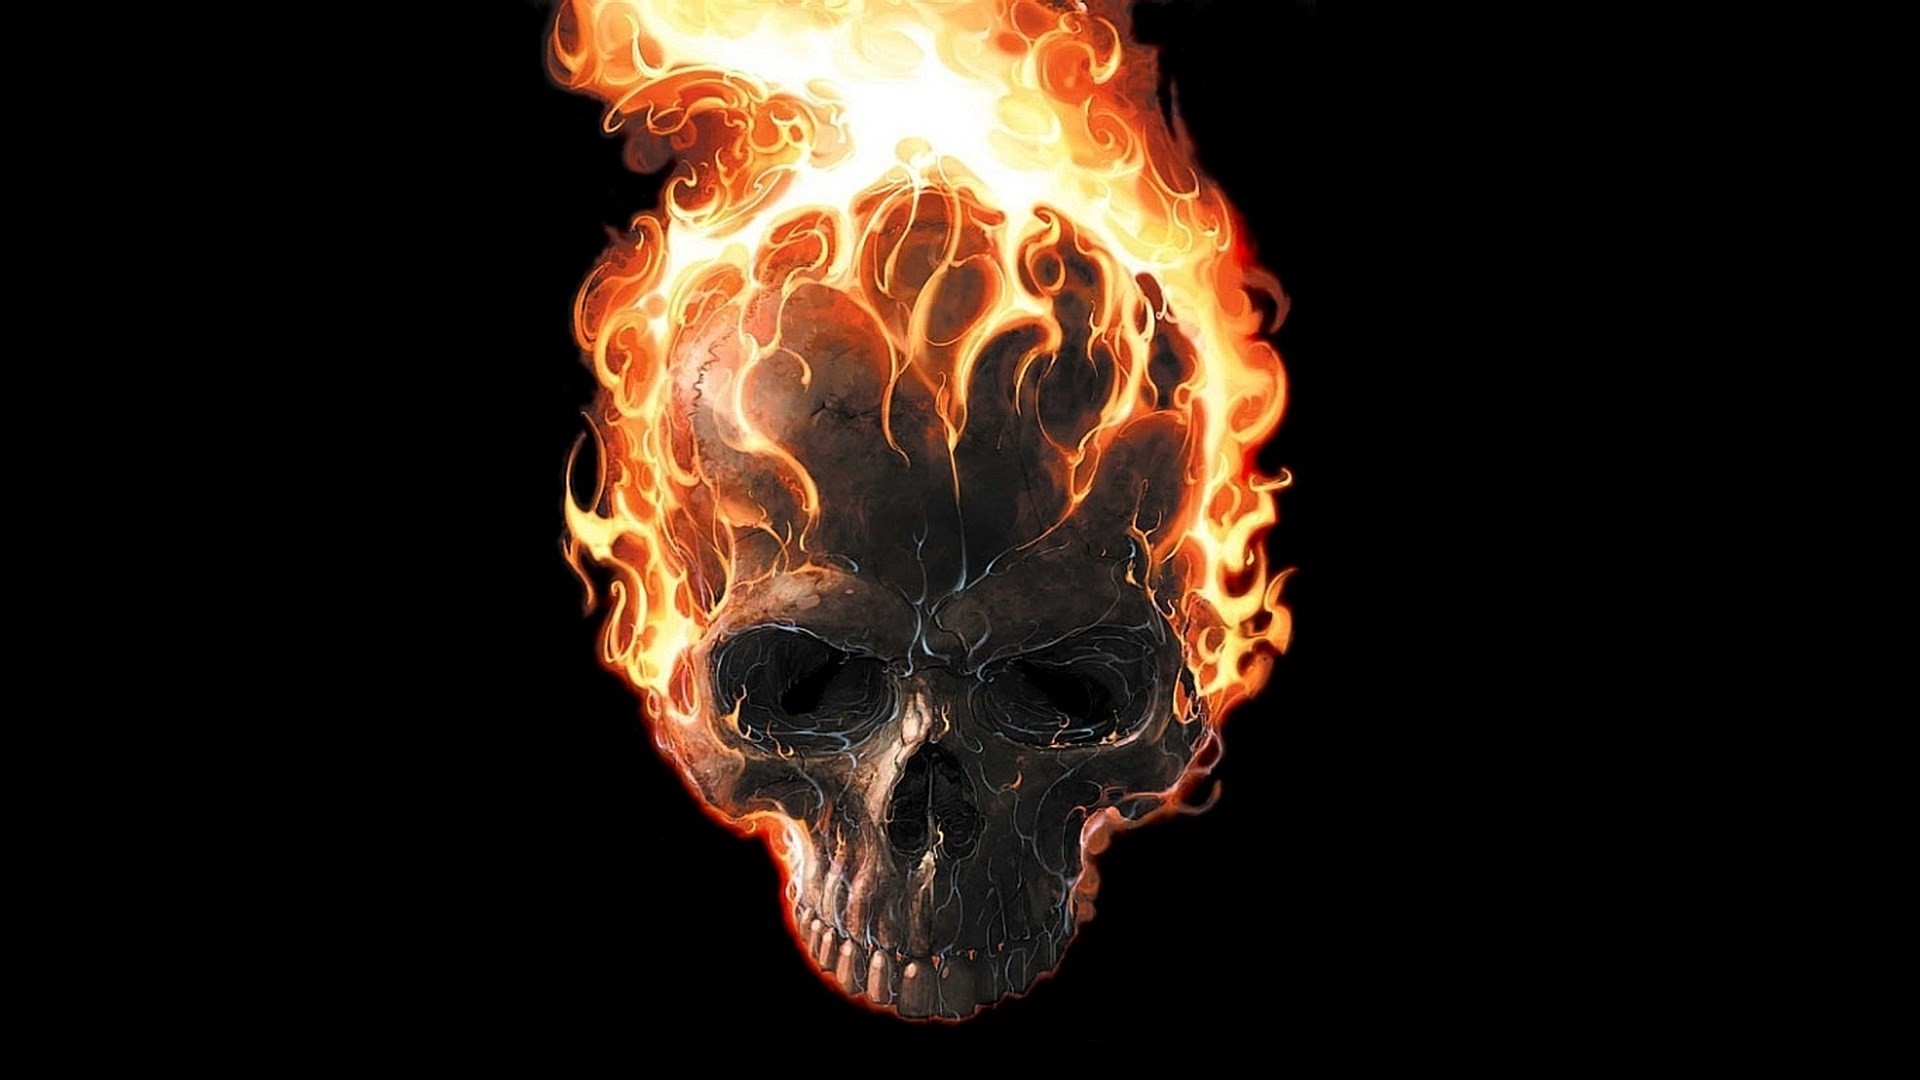 Wallpaper Ghost Rider 2 (75+ pictures)